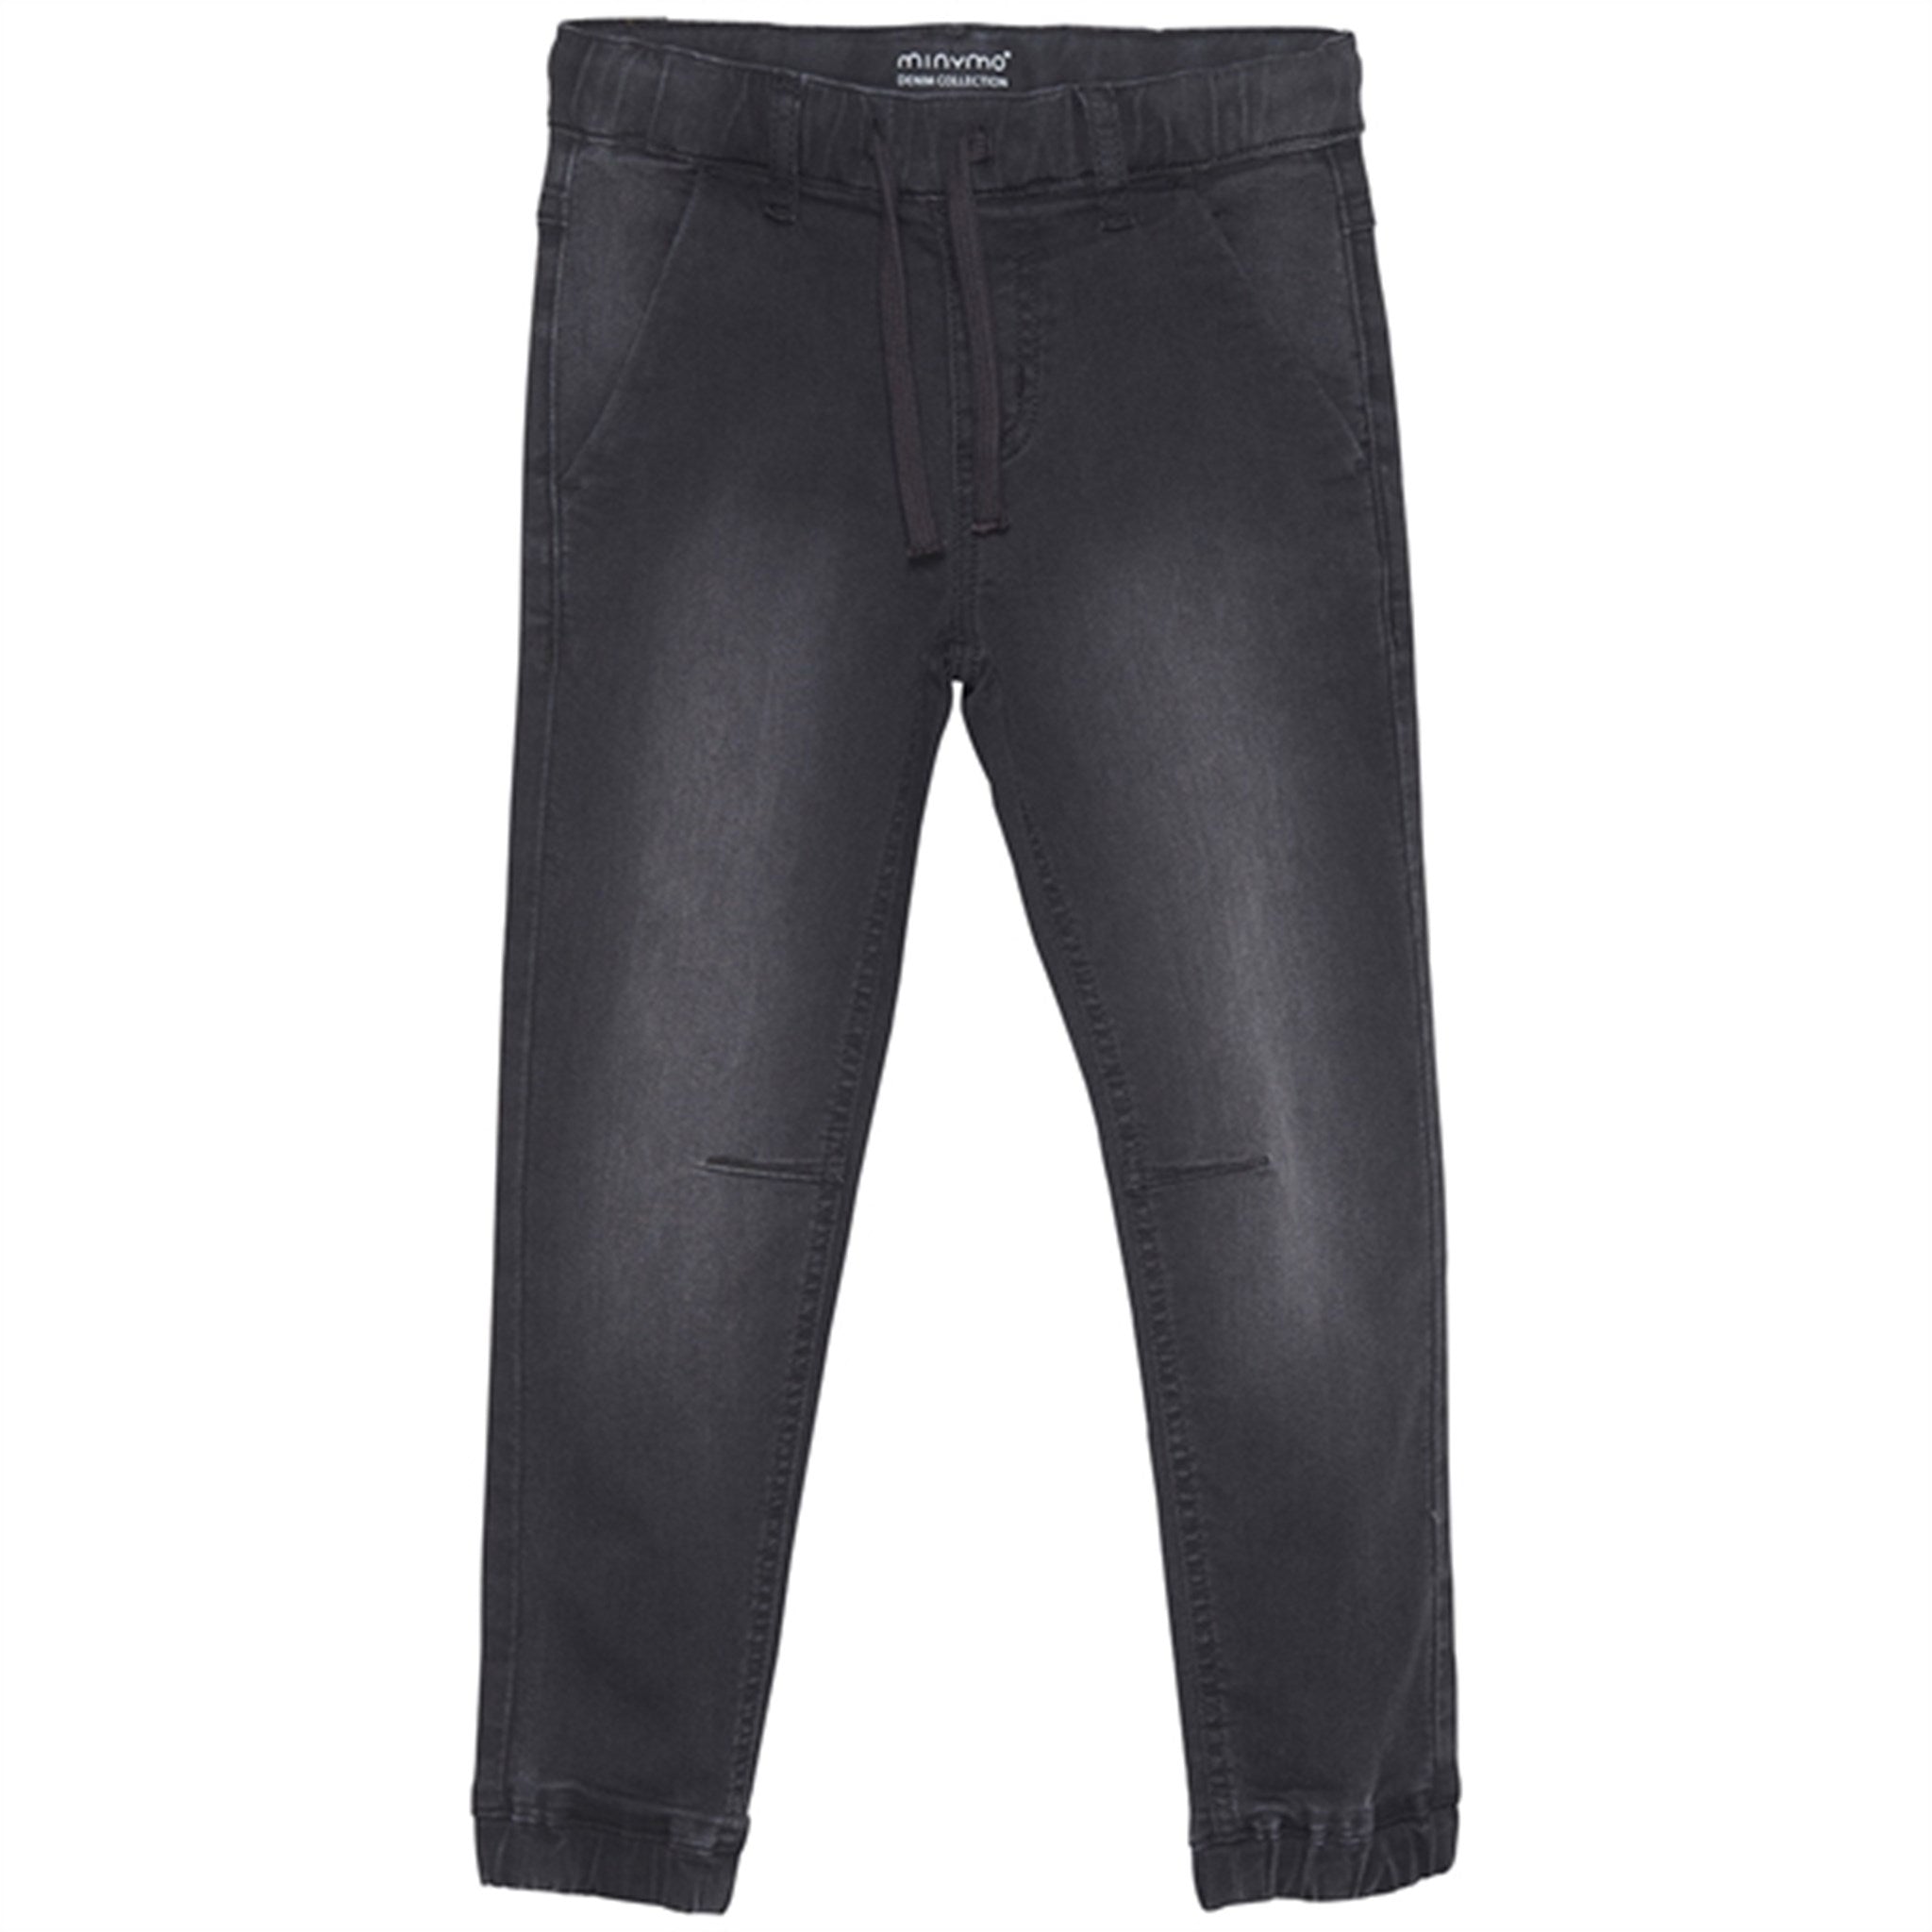 Minymo Grey Black Jeans Stretch Loose Fit NOOS